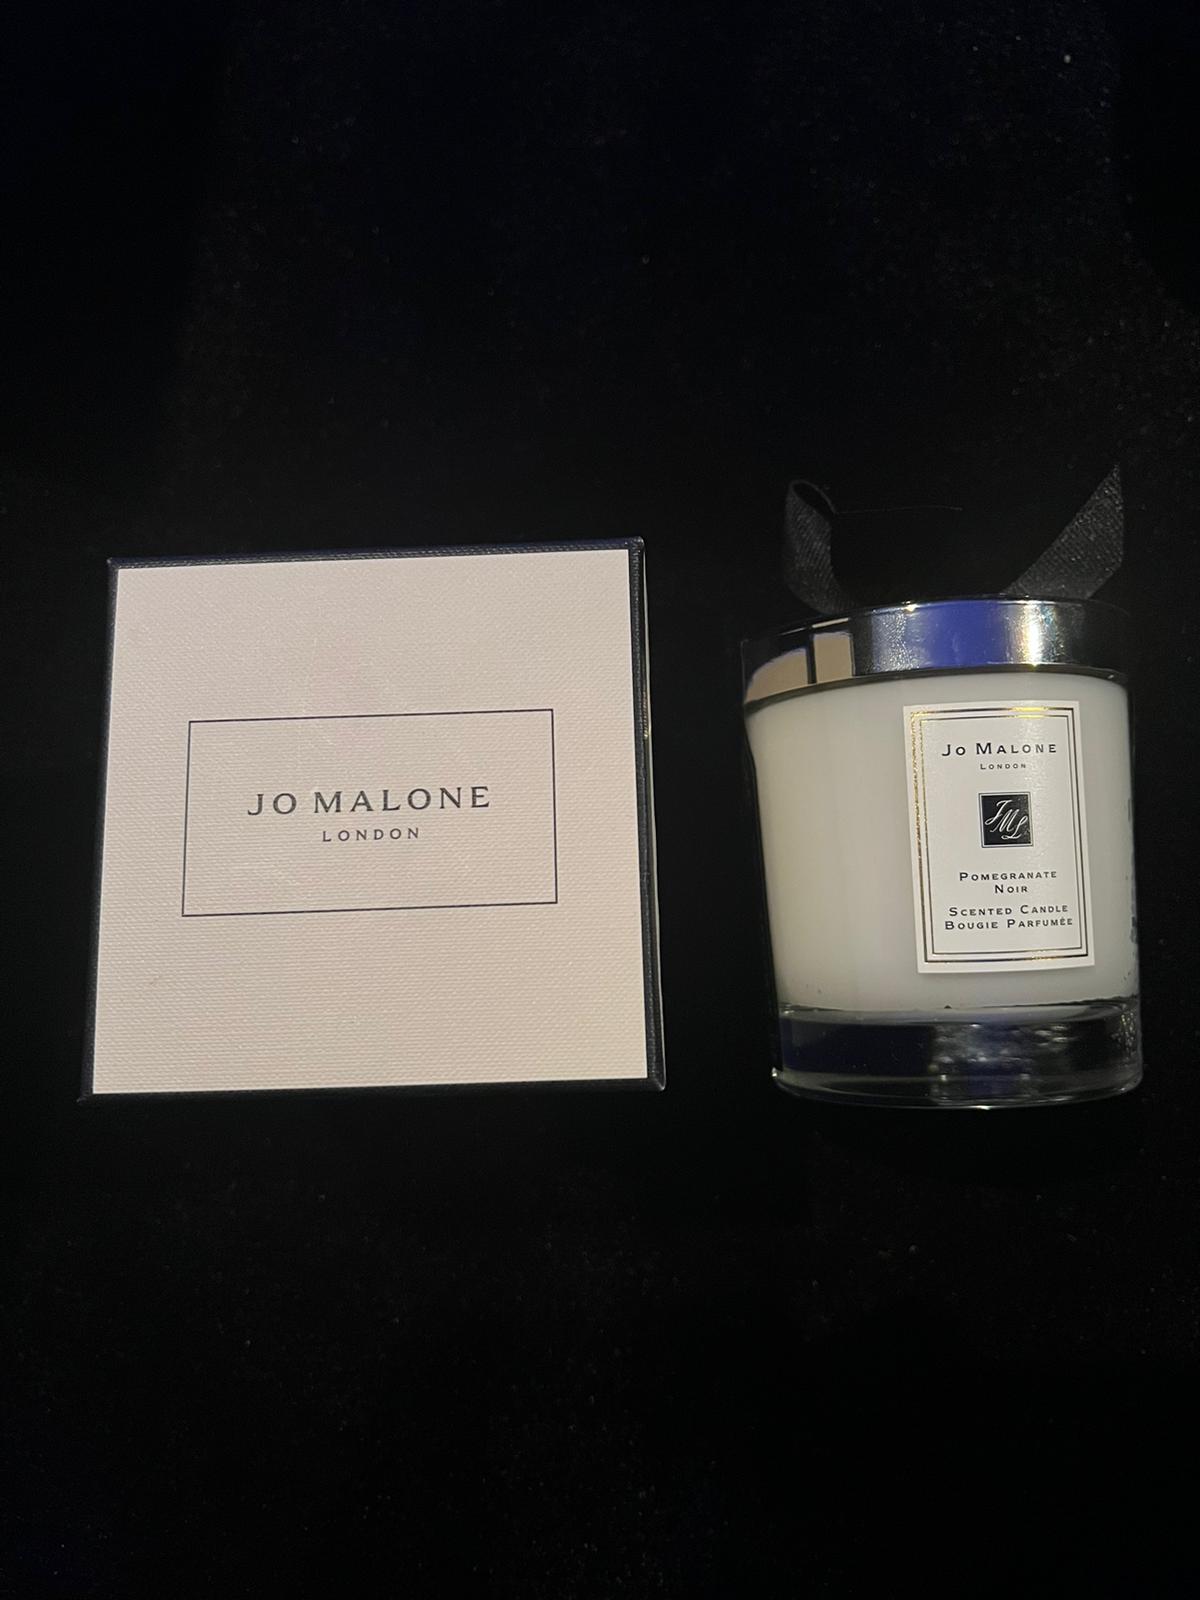 Jo Malone, Pomegranate Noir Home Candle, 200g